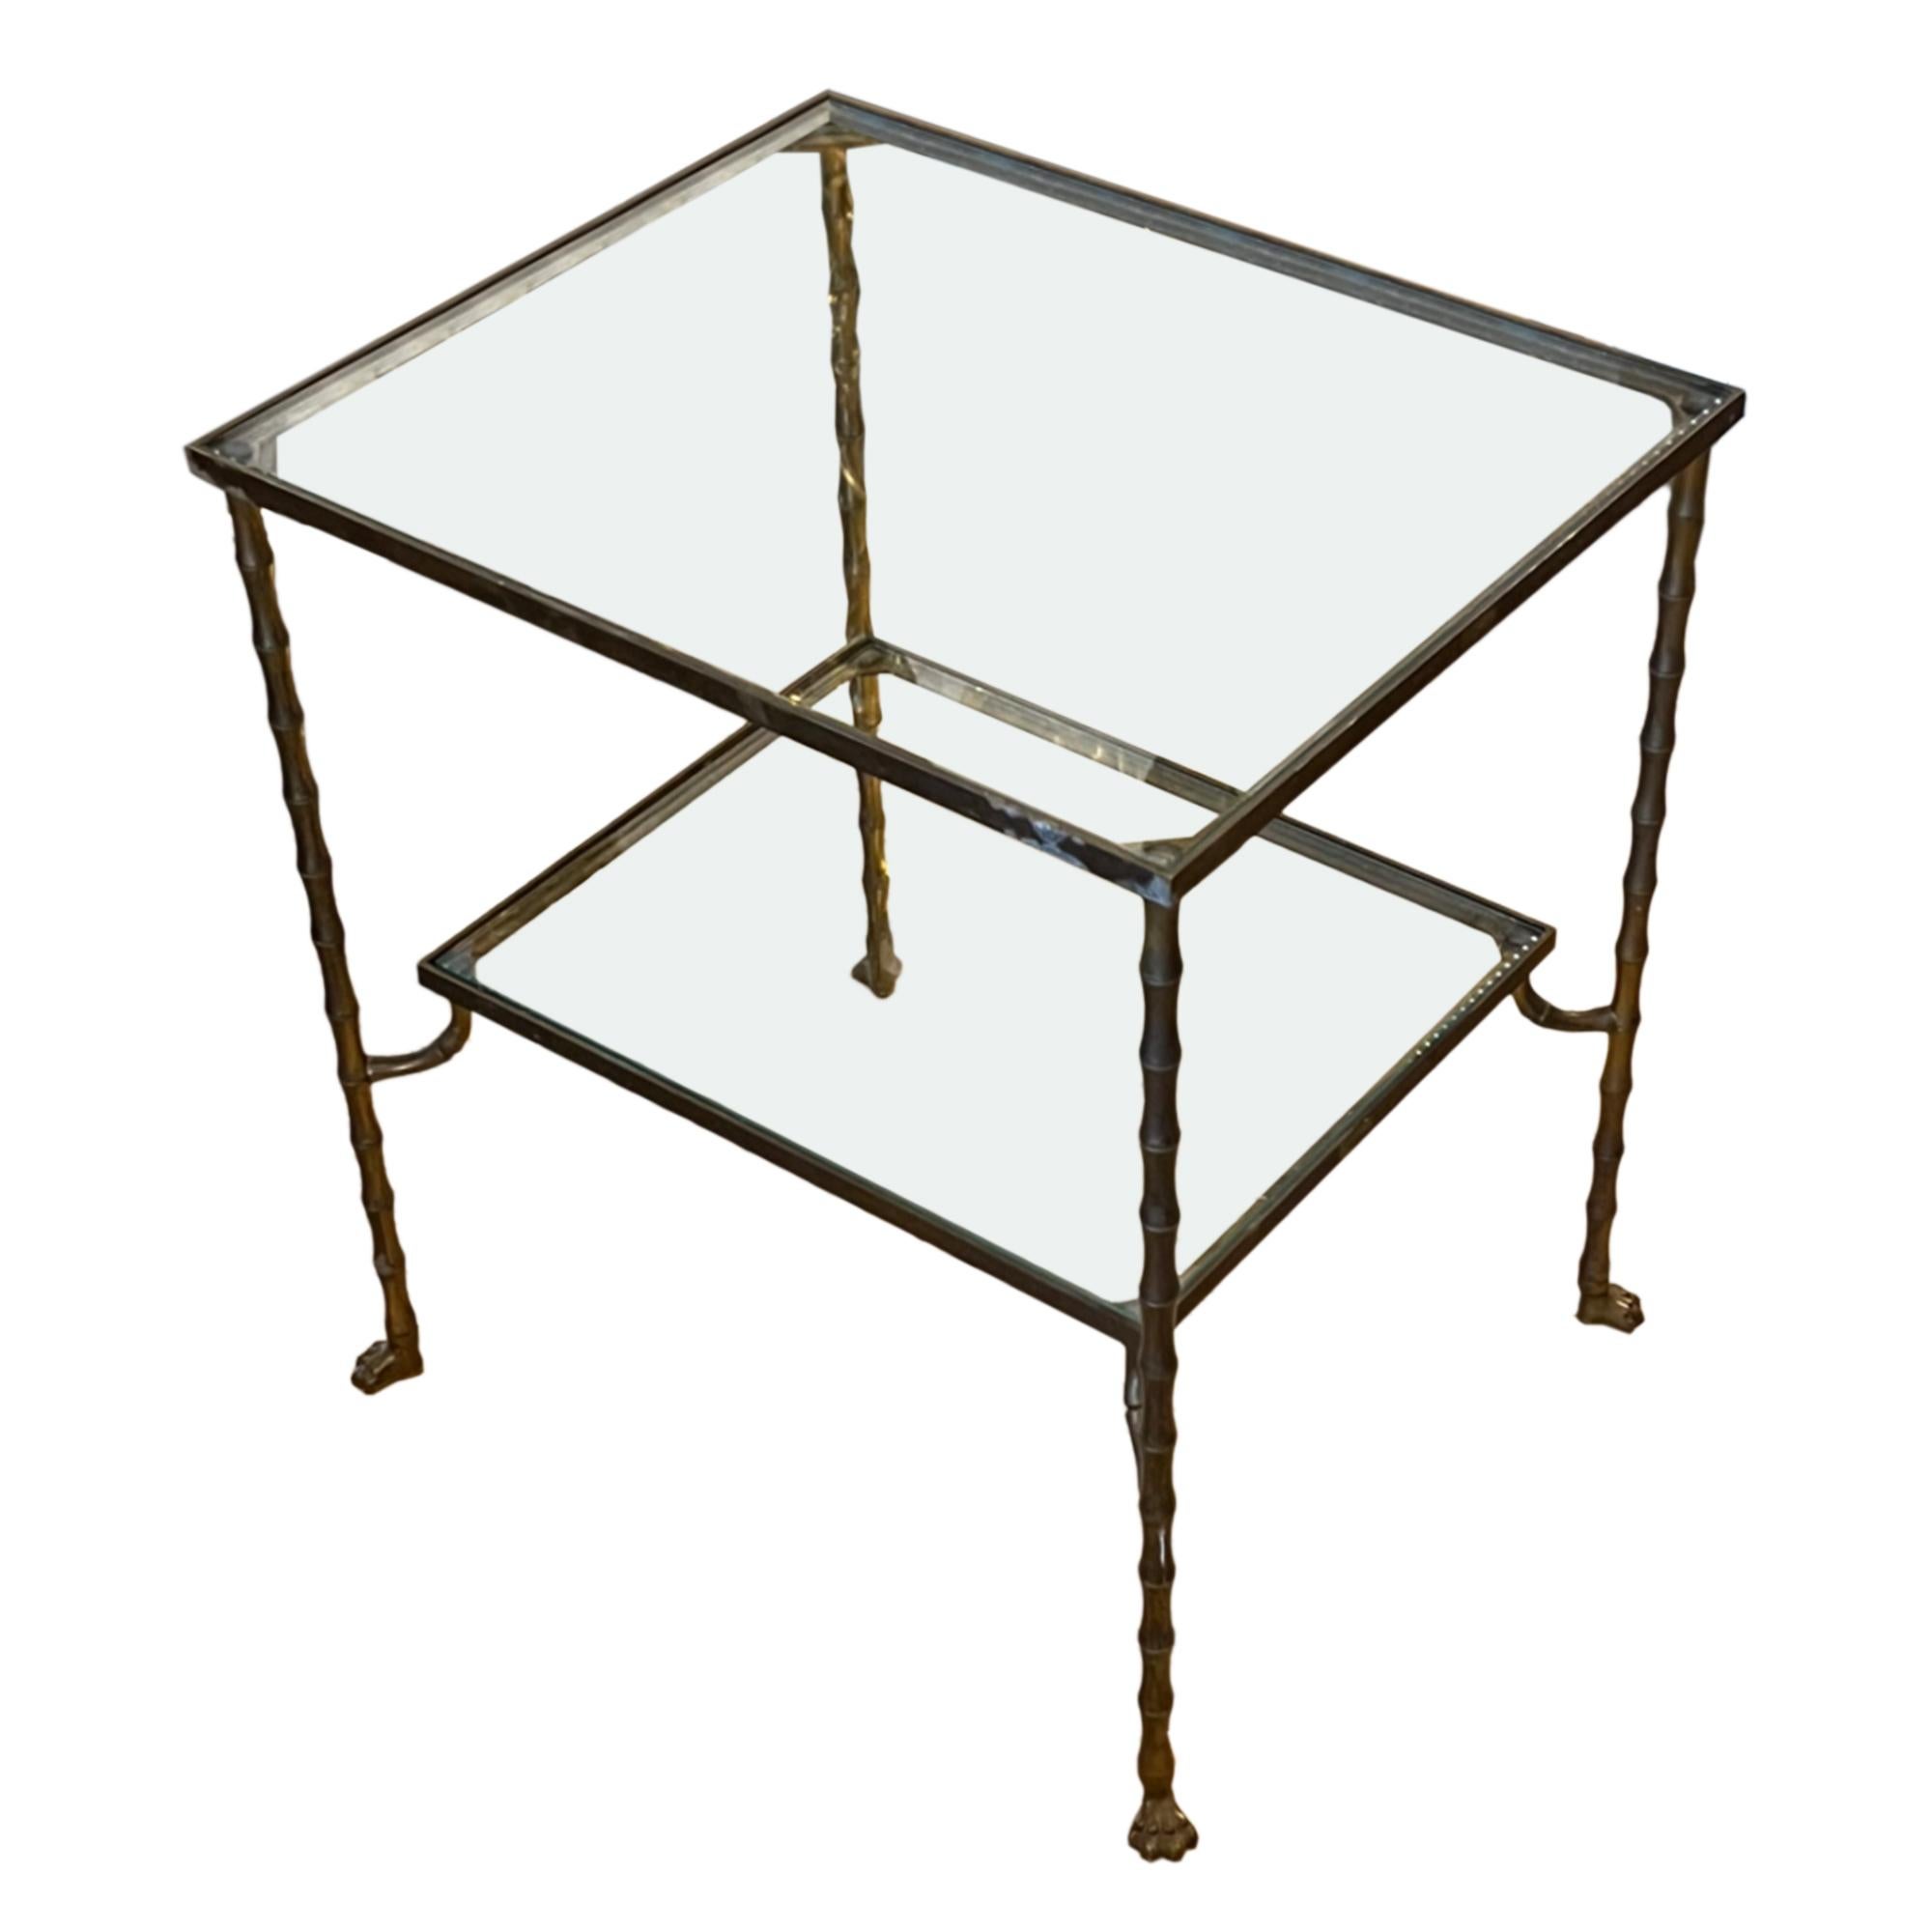 This is a lovely French 1960s side table, made from brass with a faux bamboo design with delightful paw feet.

A good size - the lower shelf, with elegant supporting arms is slightly smaller than the top. Perfect for the living room, study or